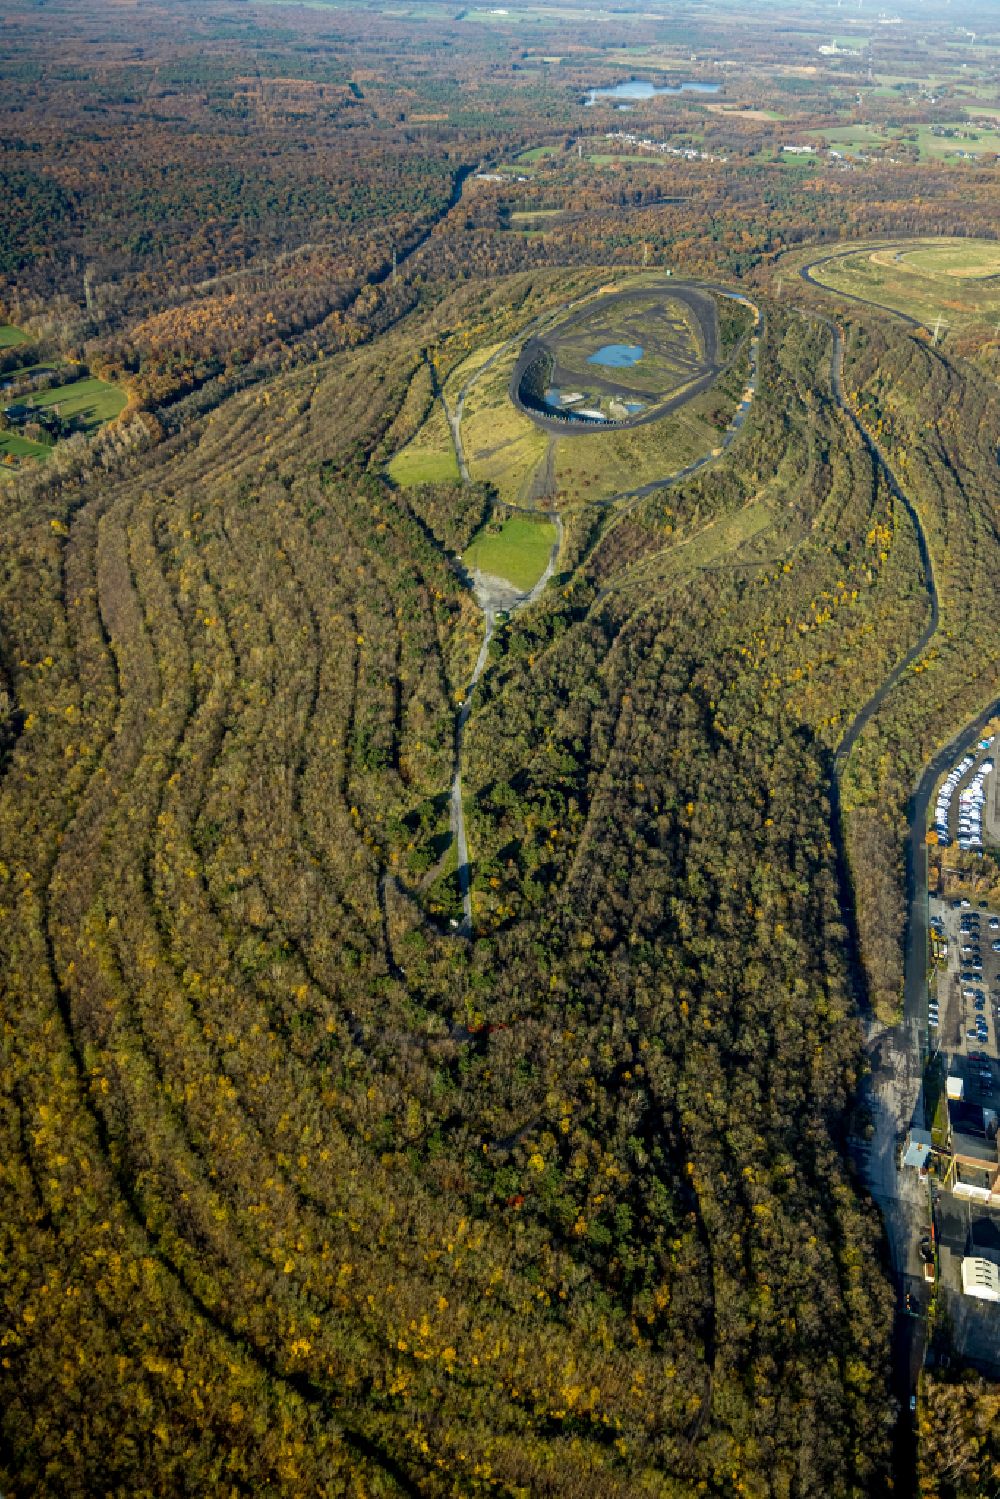 Aerial image Bottrop - Reclamation site of the former mining dump Haniel in Bottrop in the state North Rhine-Westphalia